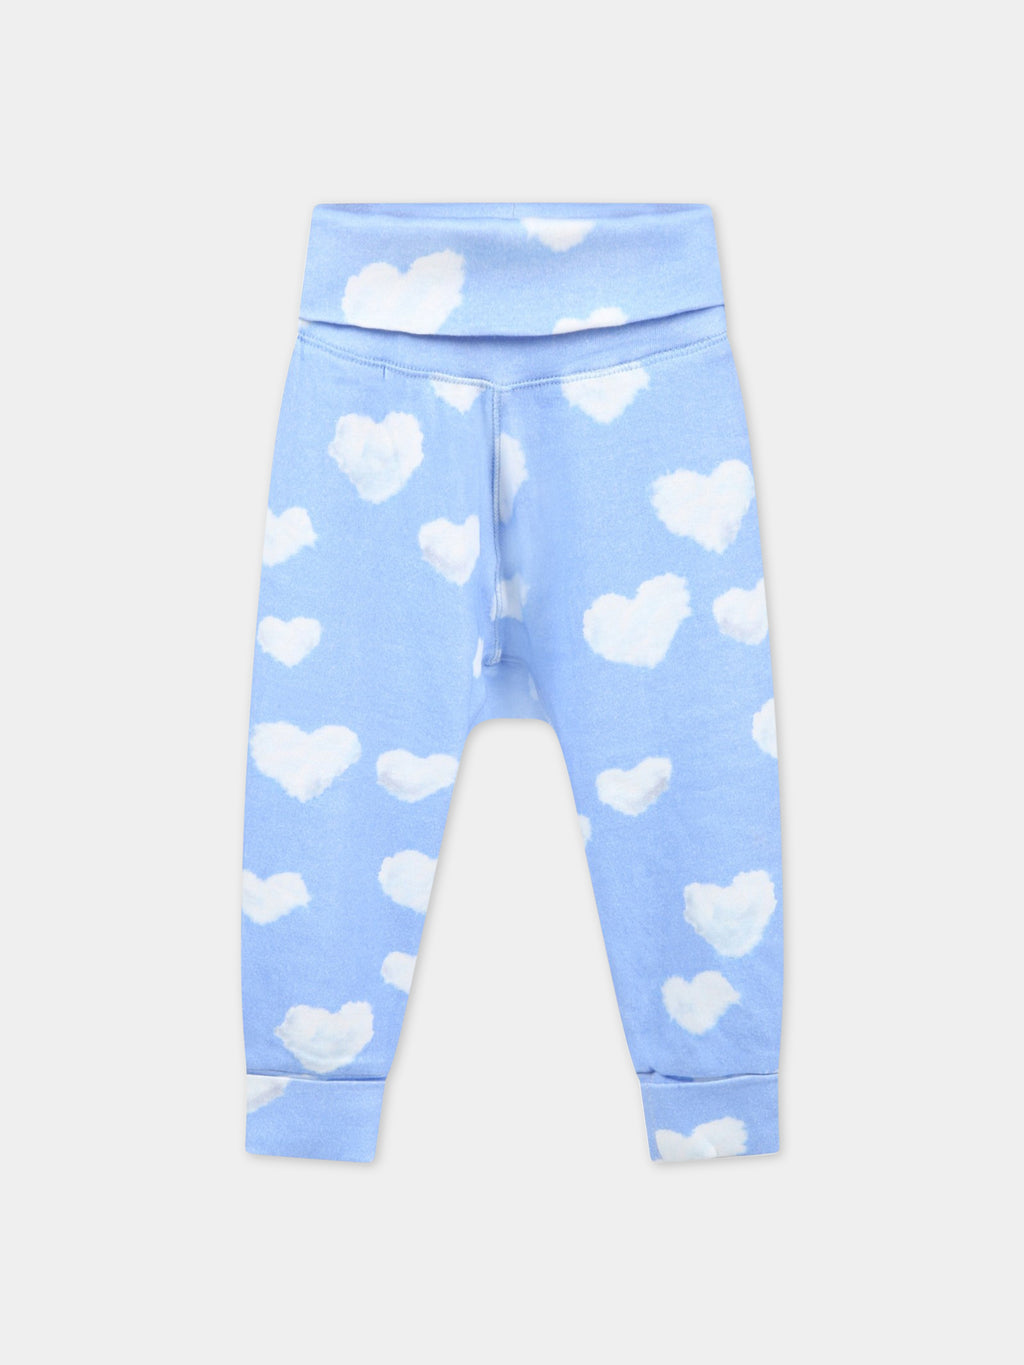 Light-blue sweatpants for babykids with iconic white clouds